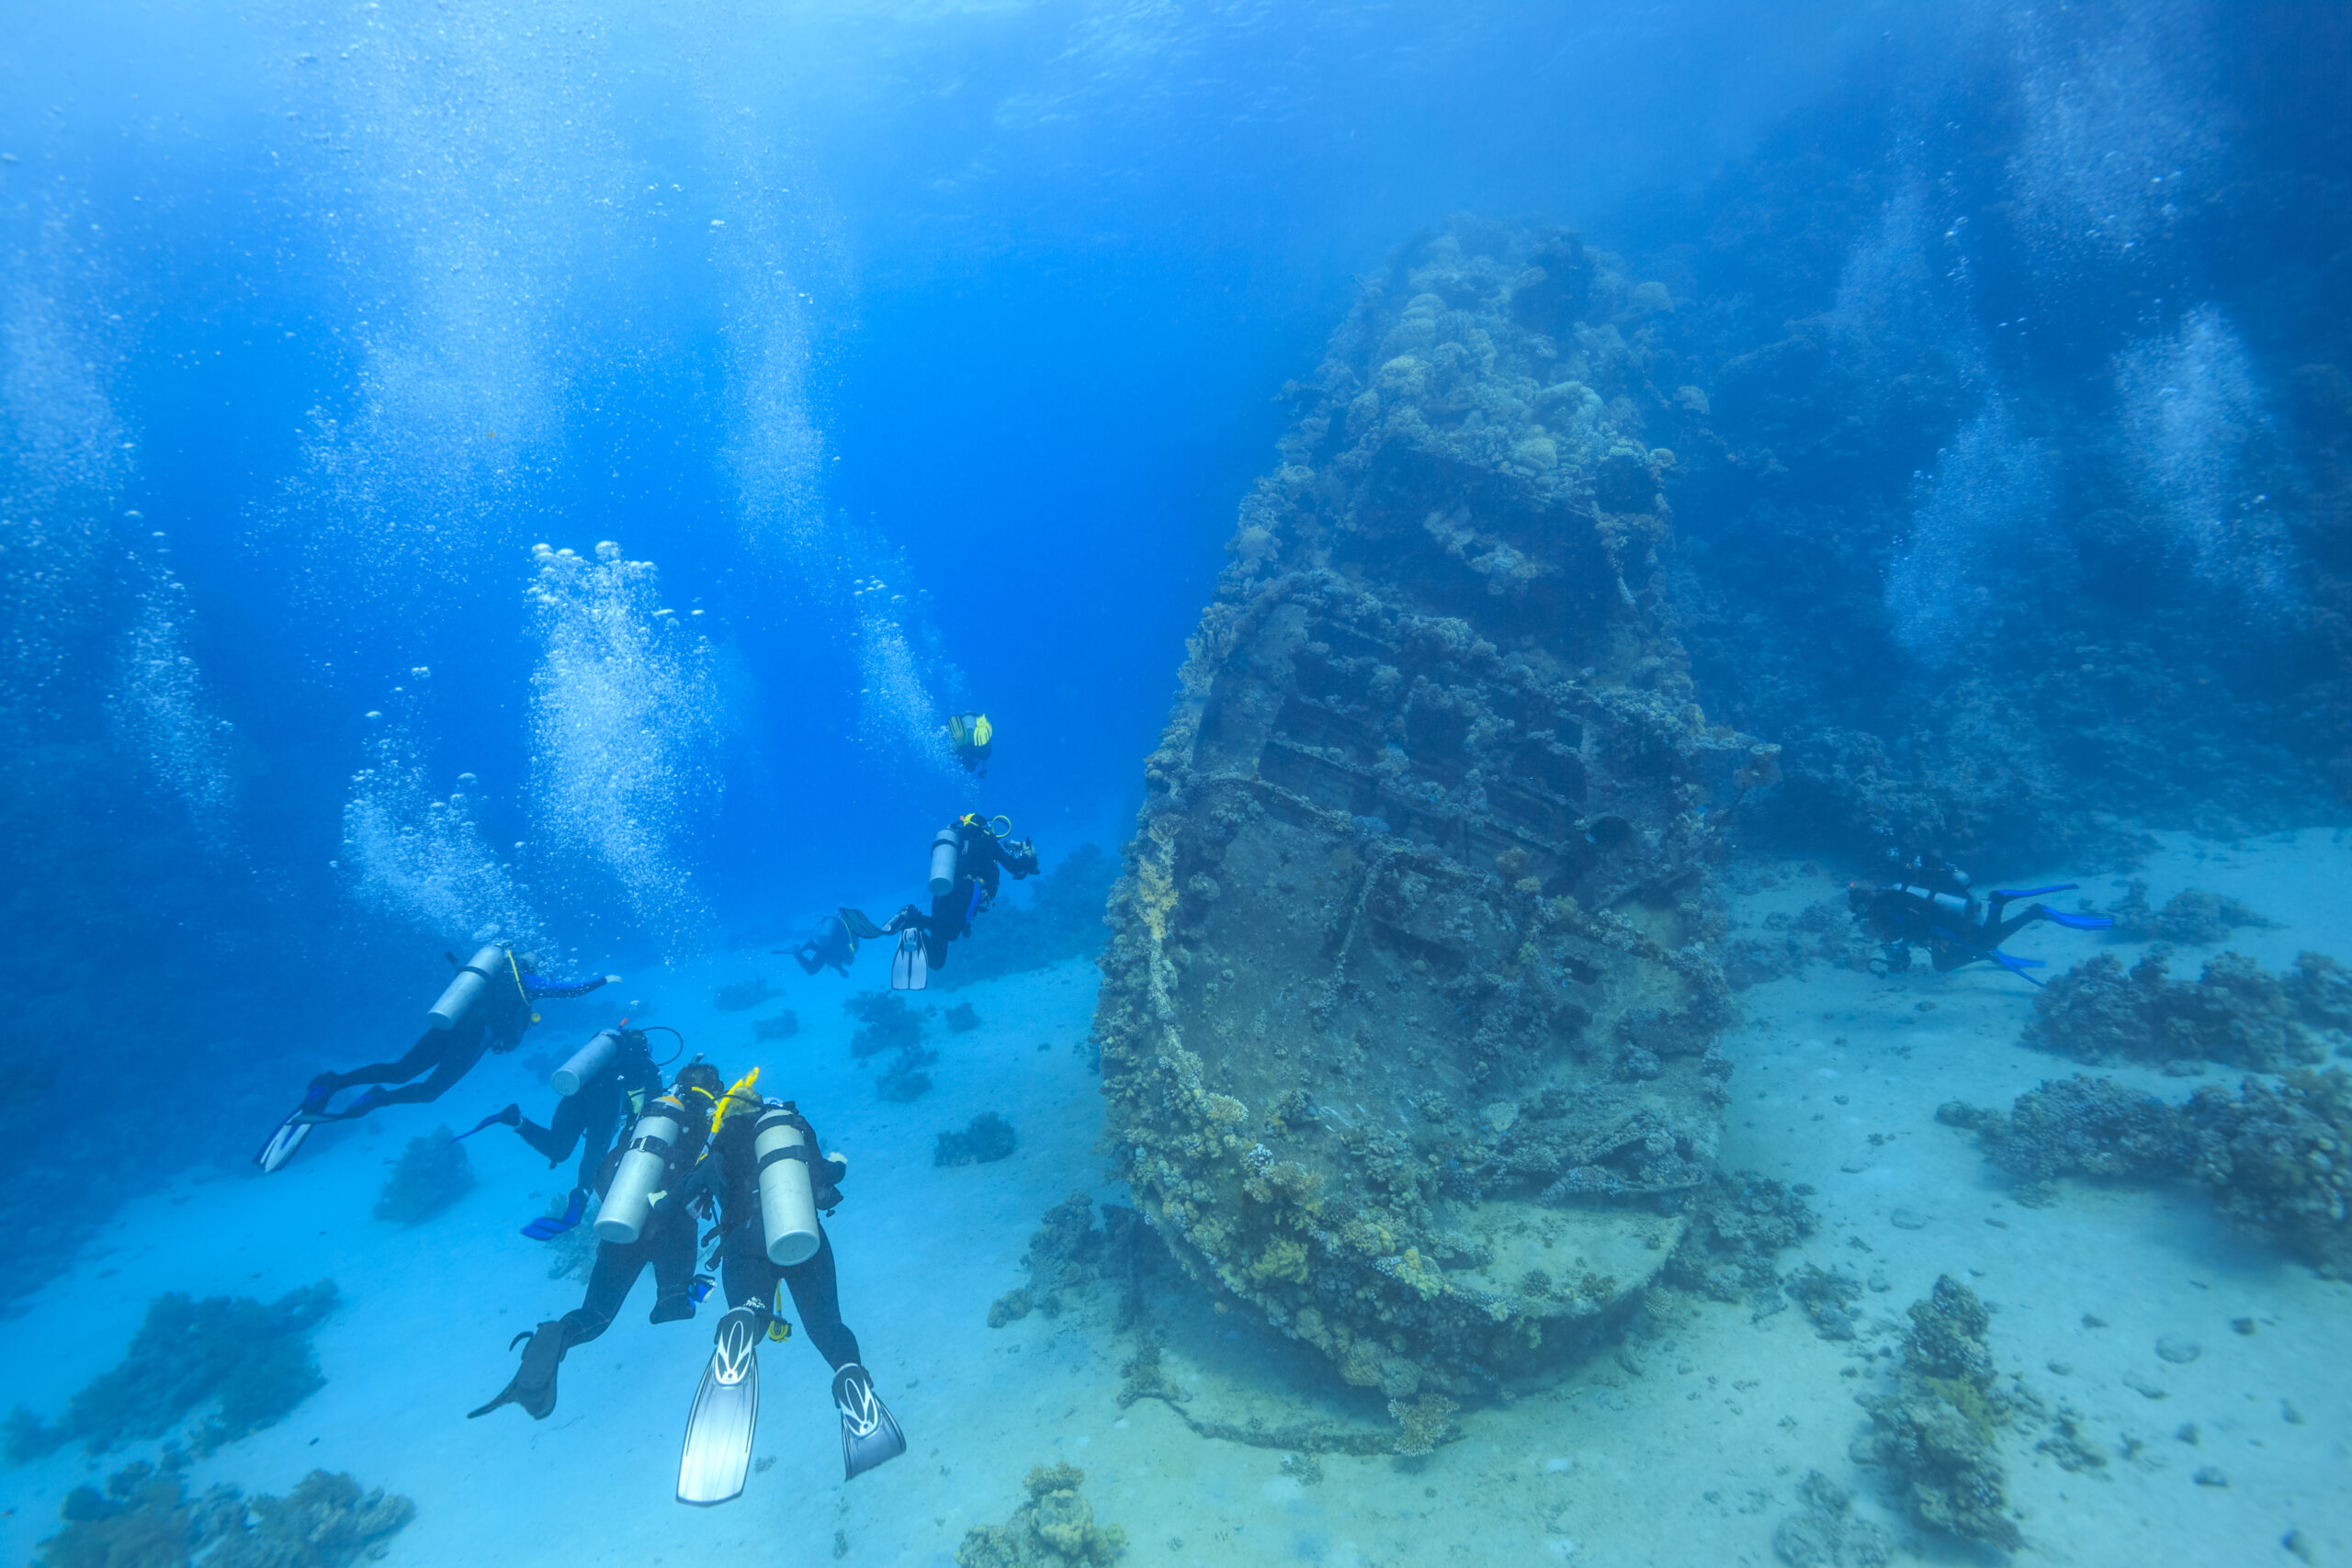 divers underwater nearing a shipwreck; Courtesy of Stas Moroz/Shutterstock